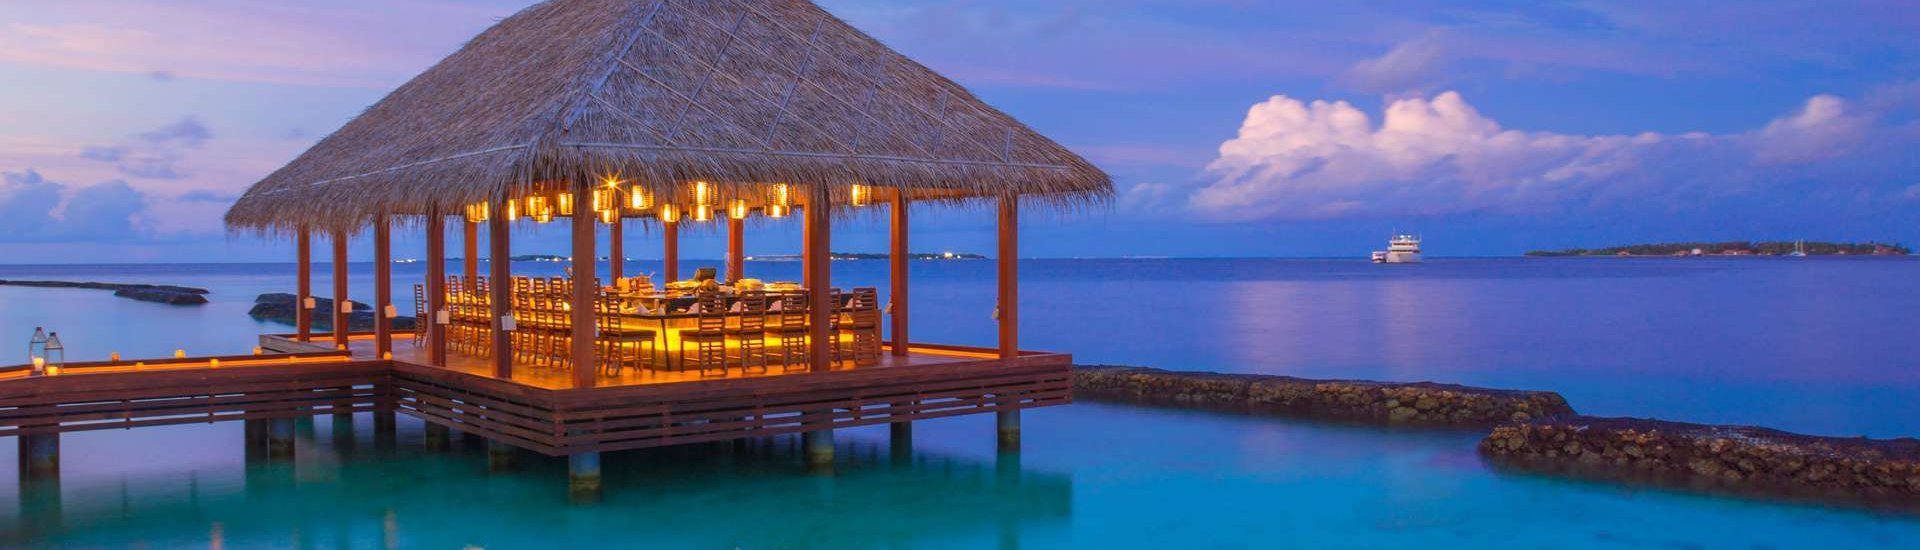 straw roof hut overlooking the stunning maldives waters